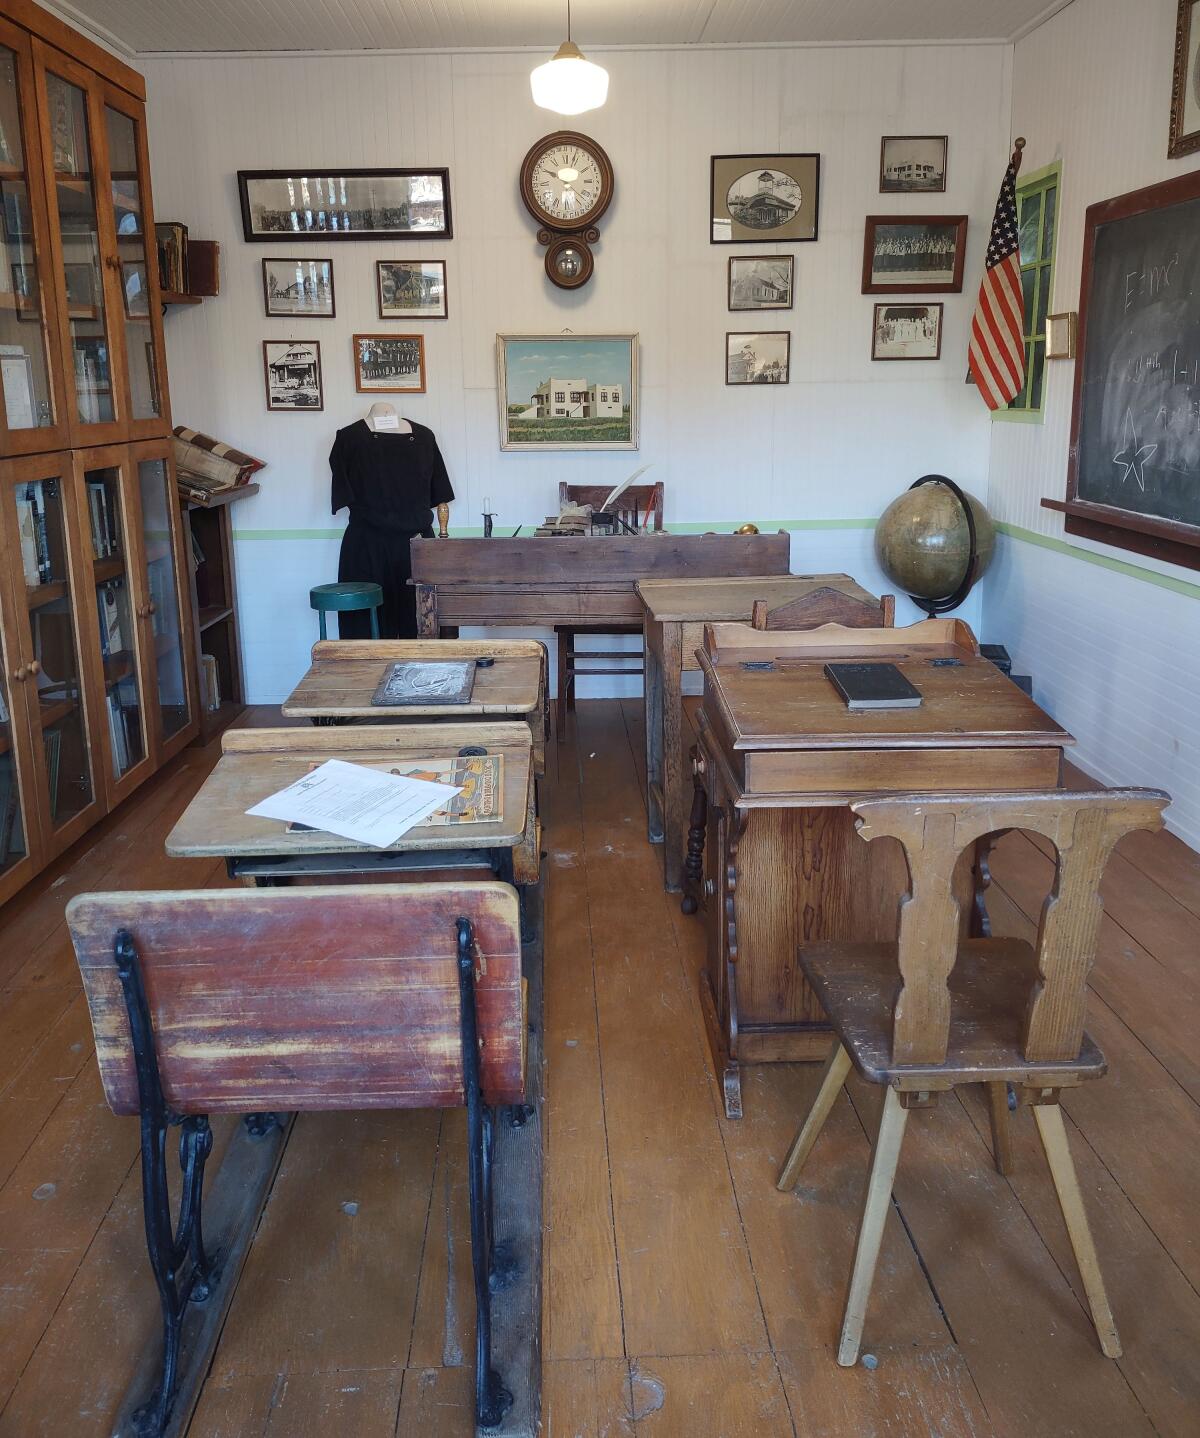 Museum visitors get to see inside a replica of an 1800s one-room schoolhouse.